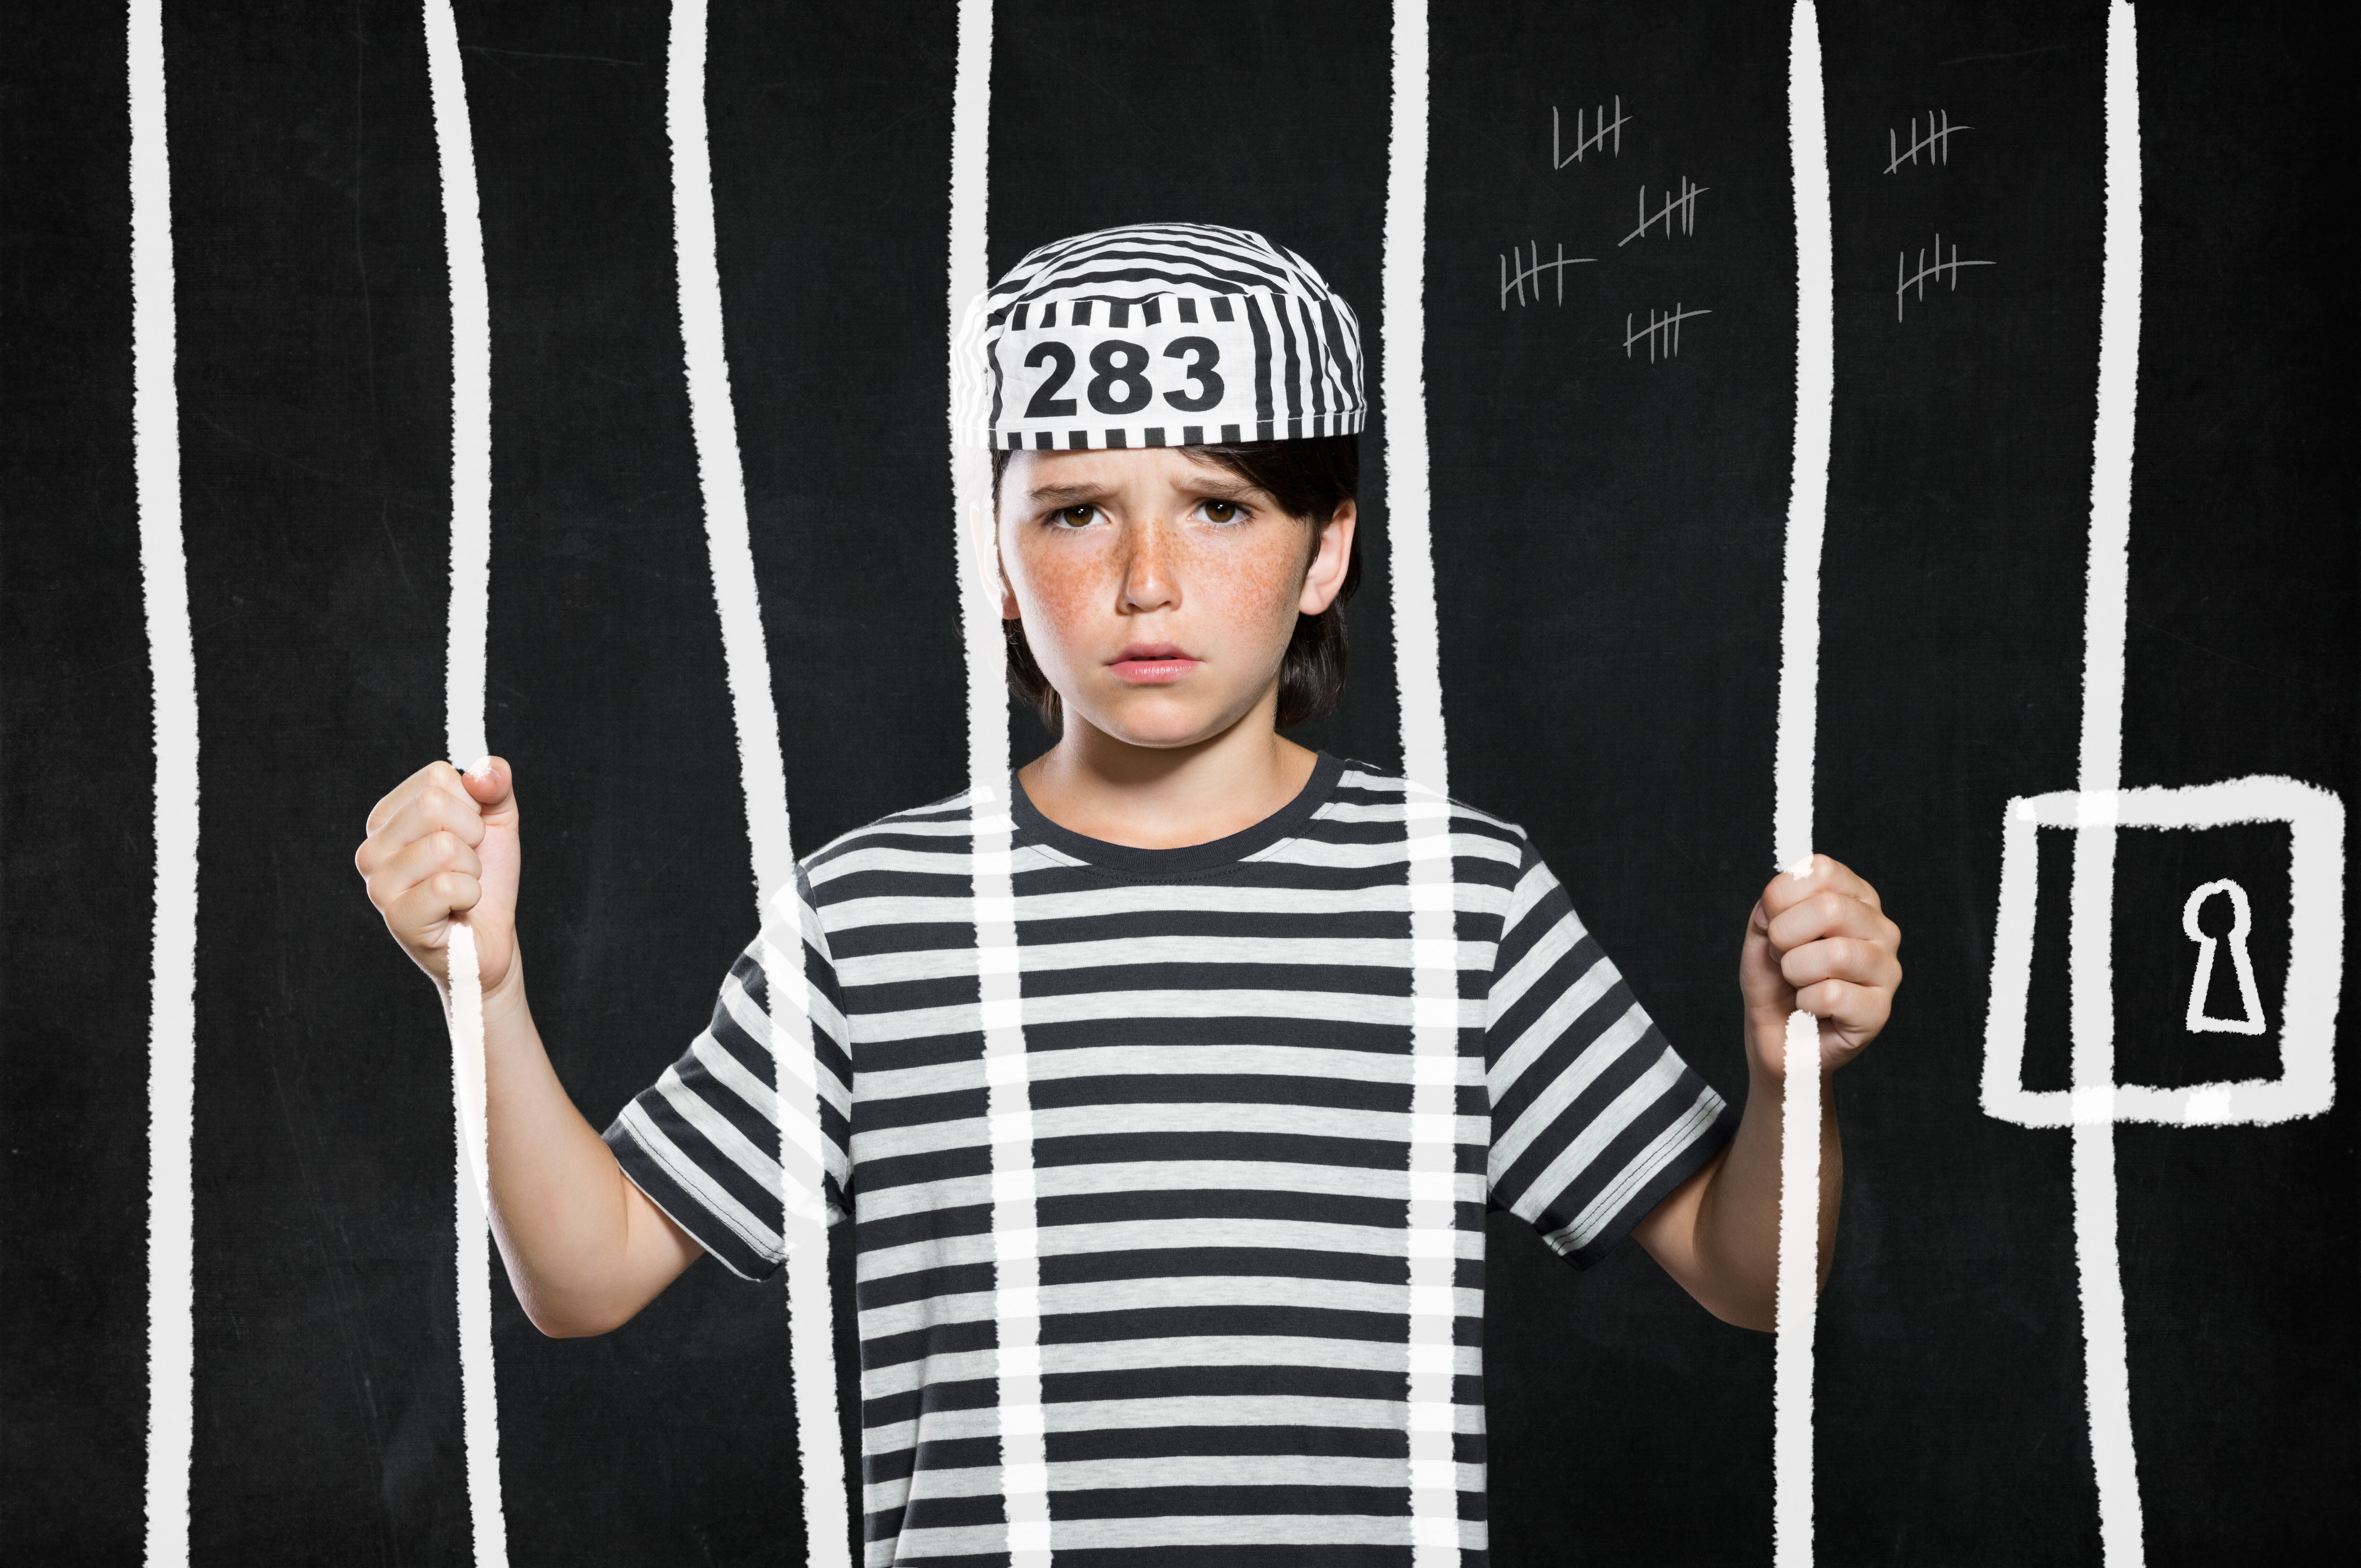 Closeup of sad bad boy wearing jail suit and kept behind bars. Portrait of little prank in jail. Sad male kid wearing striped clothes.